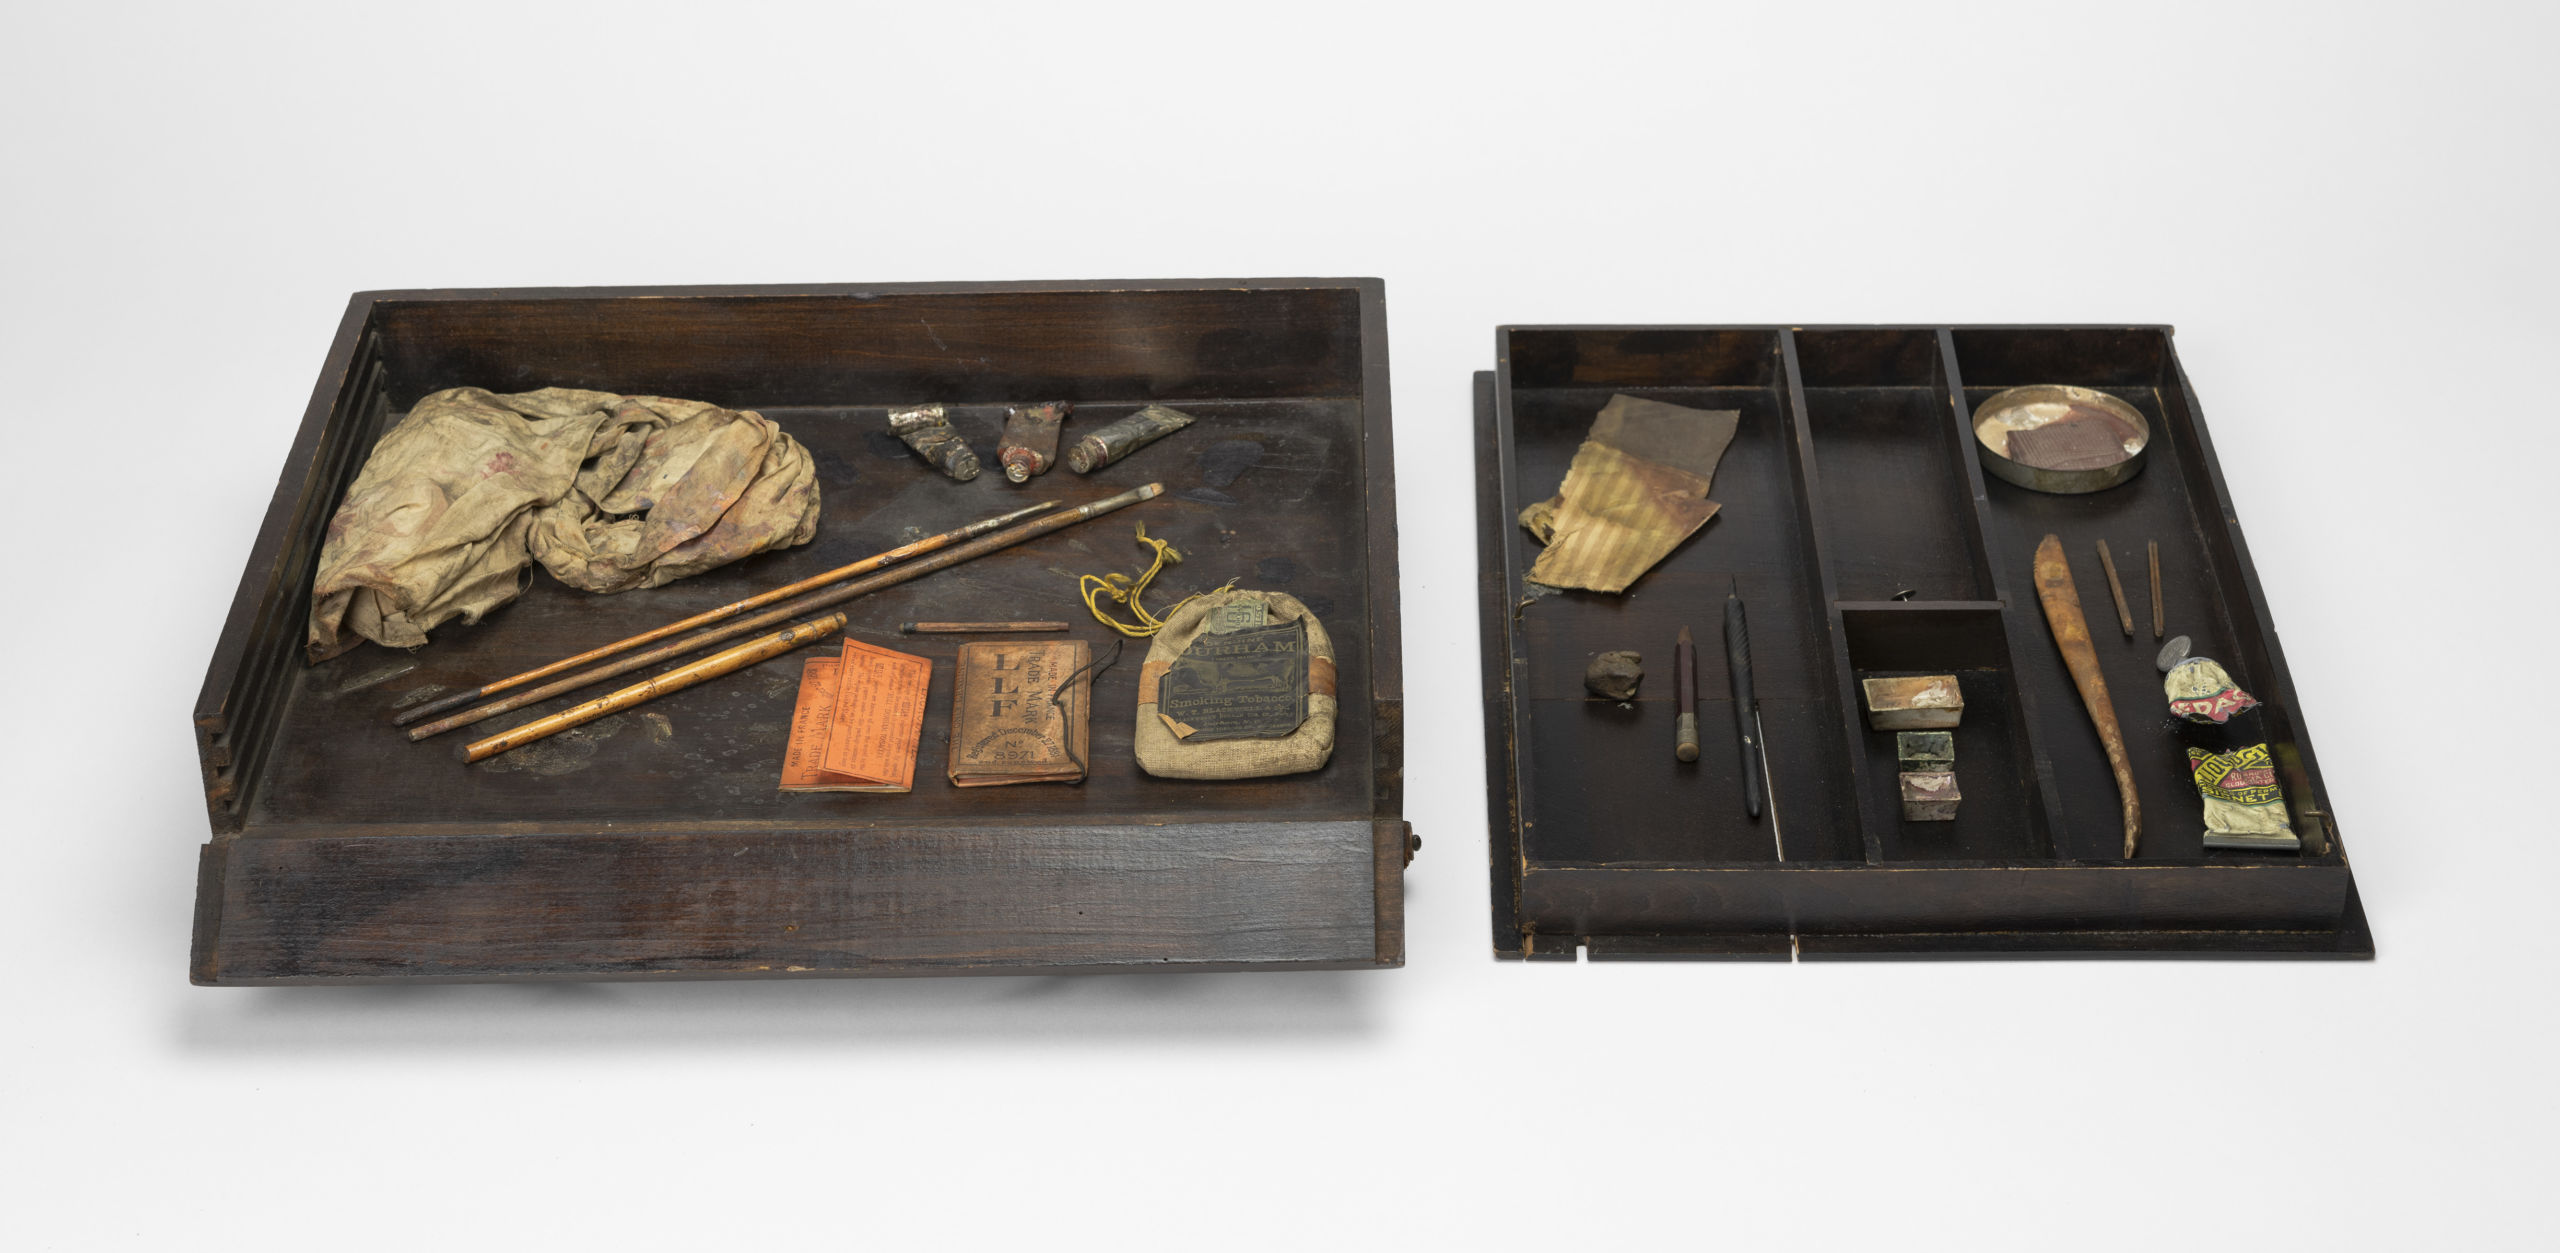 artist's sketch box with art tools and other supplies